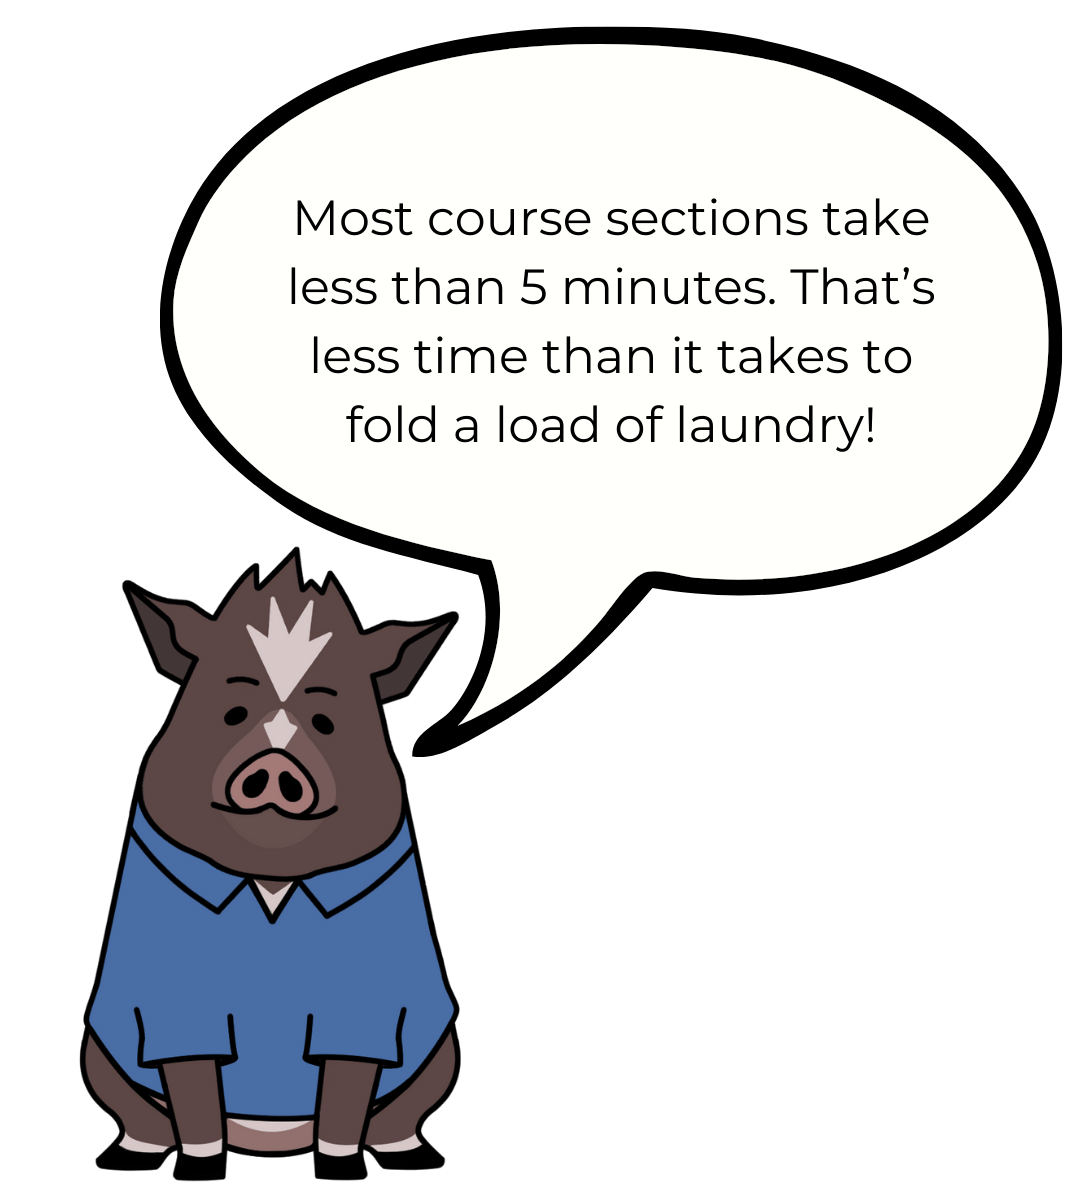 Cartoon drawing of Winston with a speech bubble that says, "Most course sections take less than 5 minutes. That's less time than it takes to fold a load of laundry!"